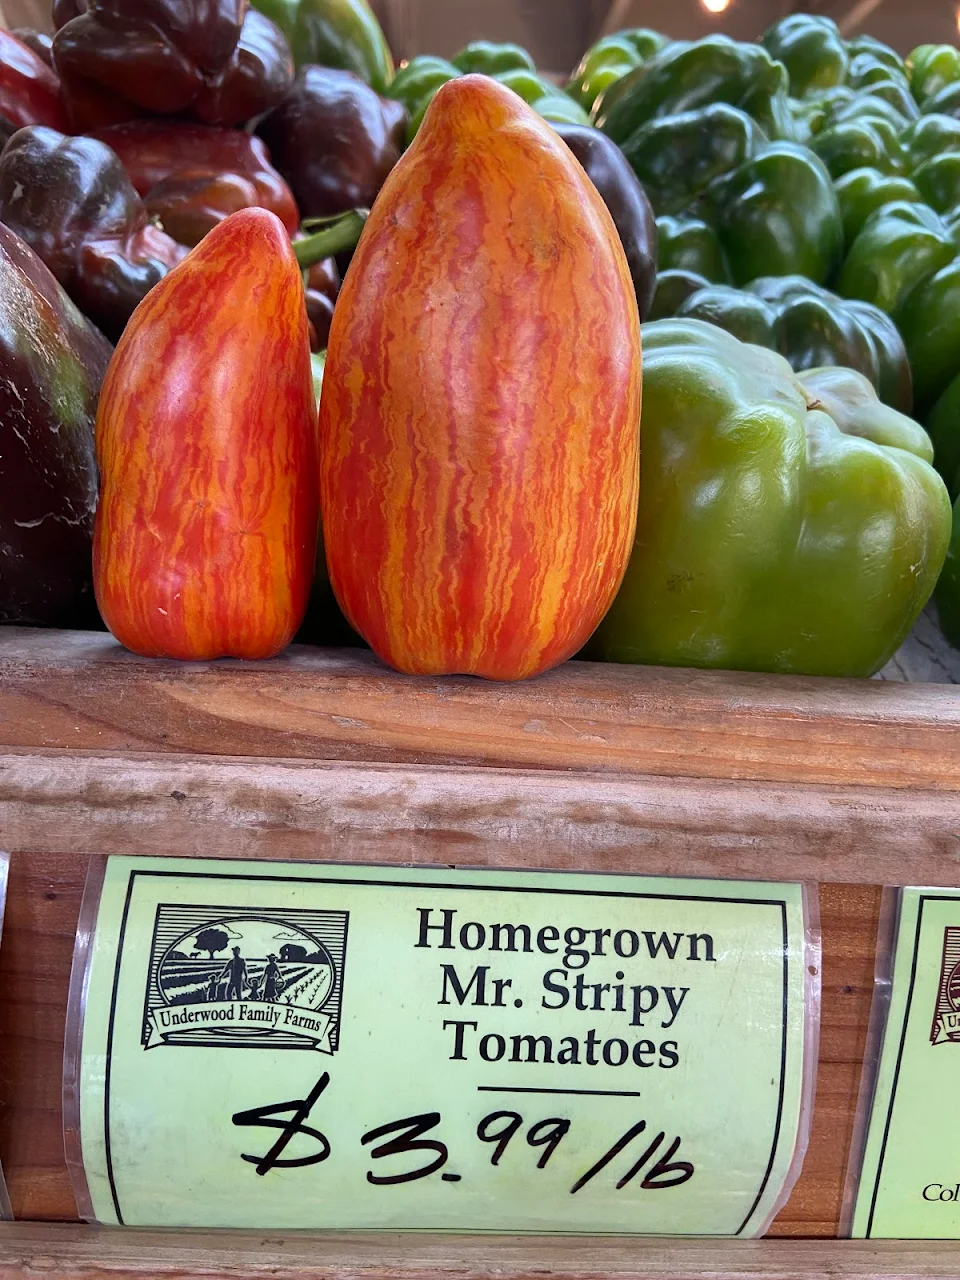 These “Mr. Stripy” tomatoes are appropriately named.